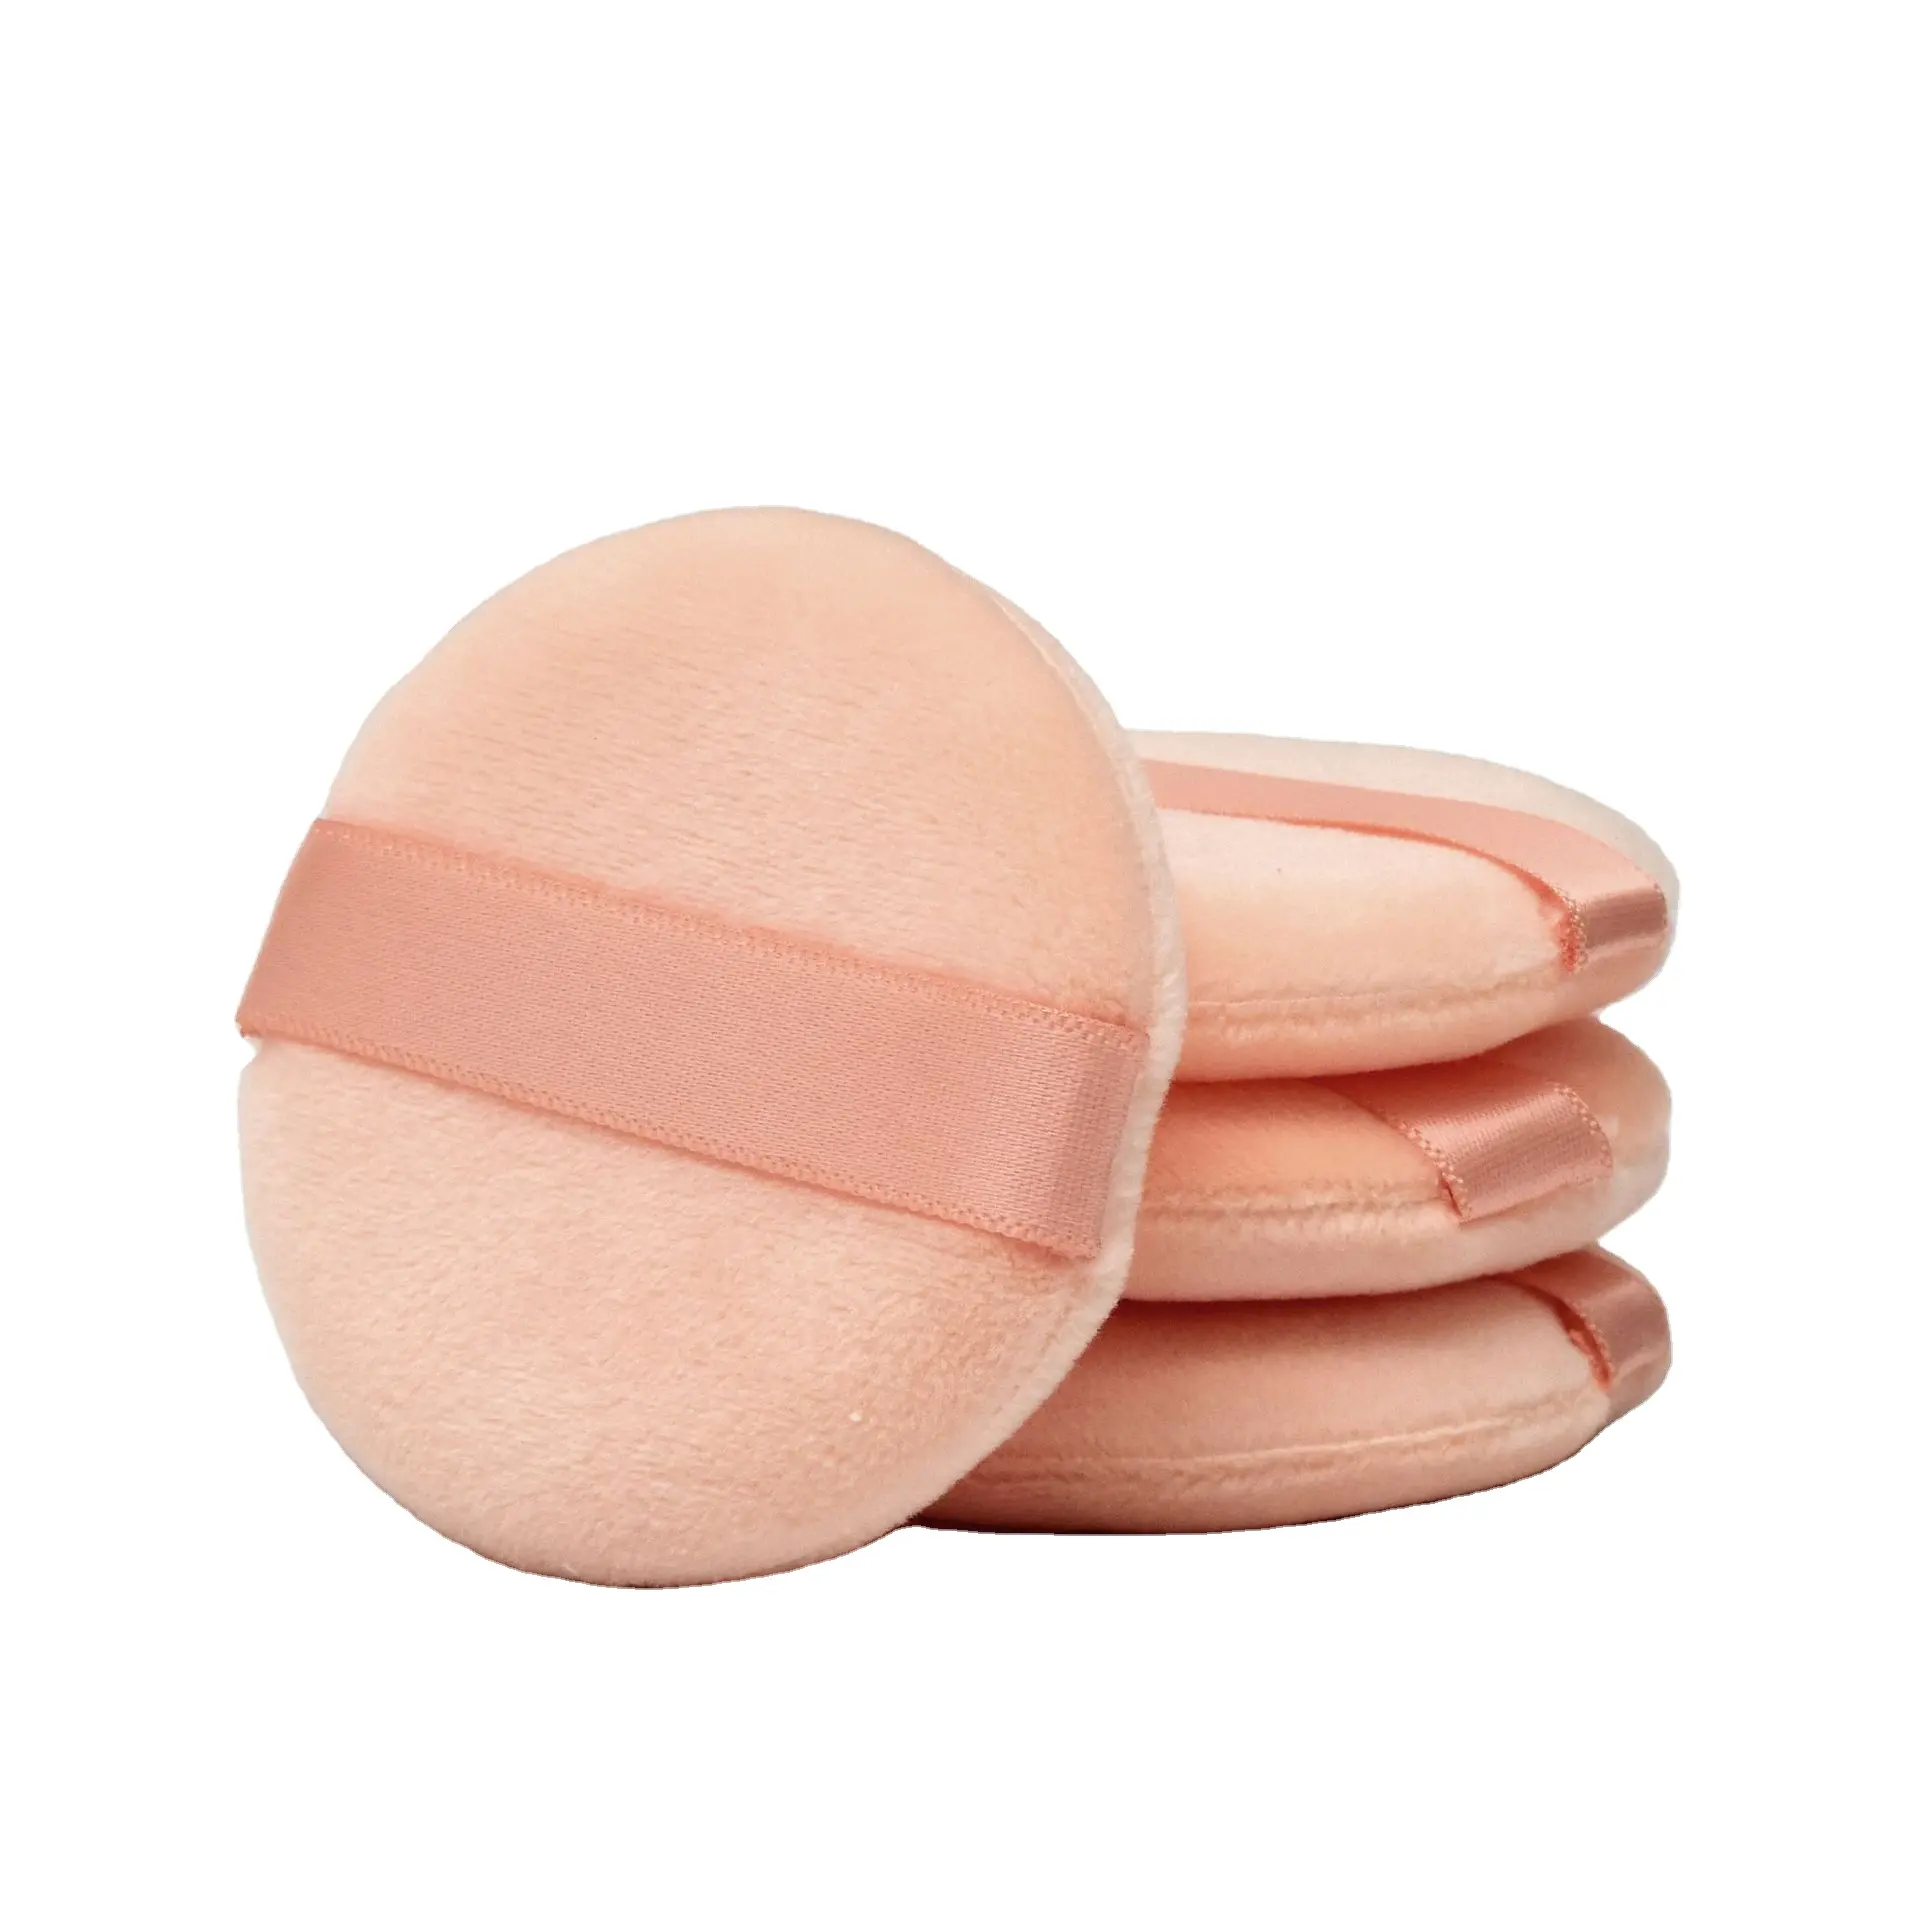 Wholesale Soft Air cushion Lager Makeup Puff Powder Cotton Round Makeup Sponge Cosmetic Puff Wet Dry Use